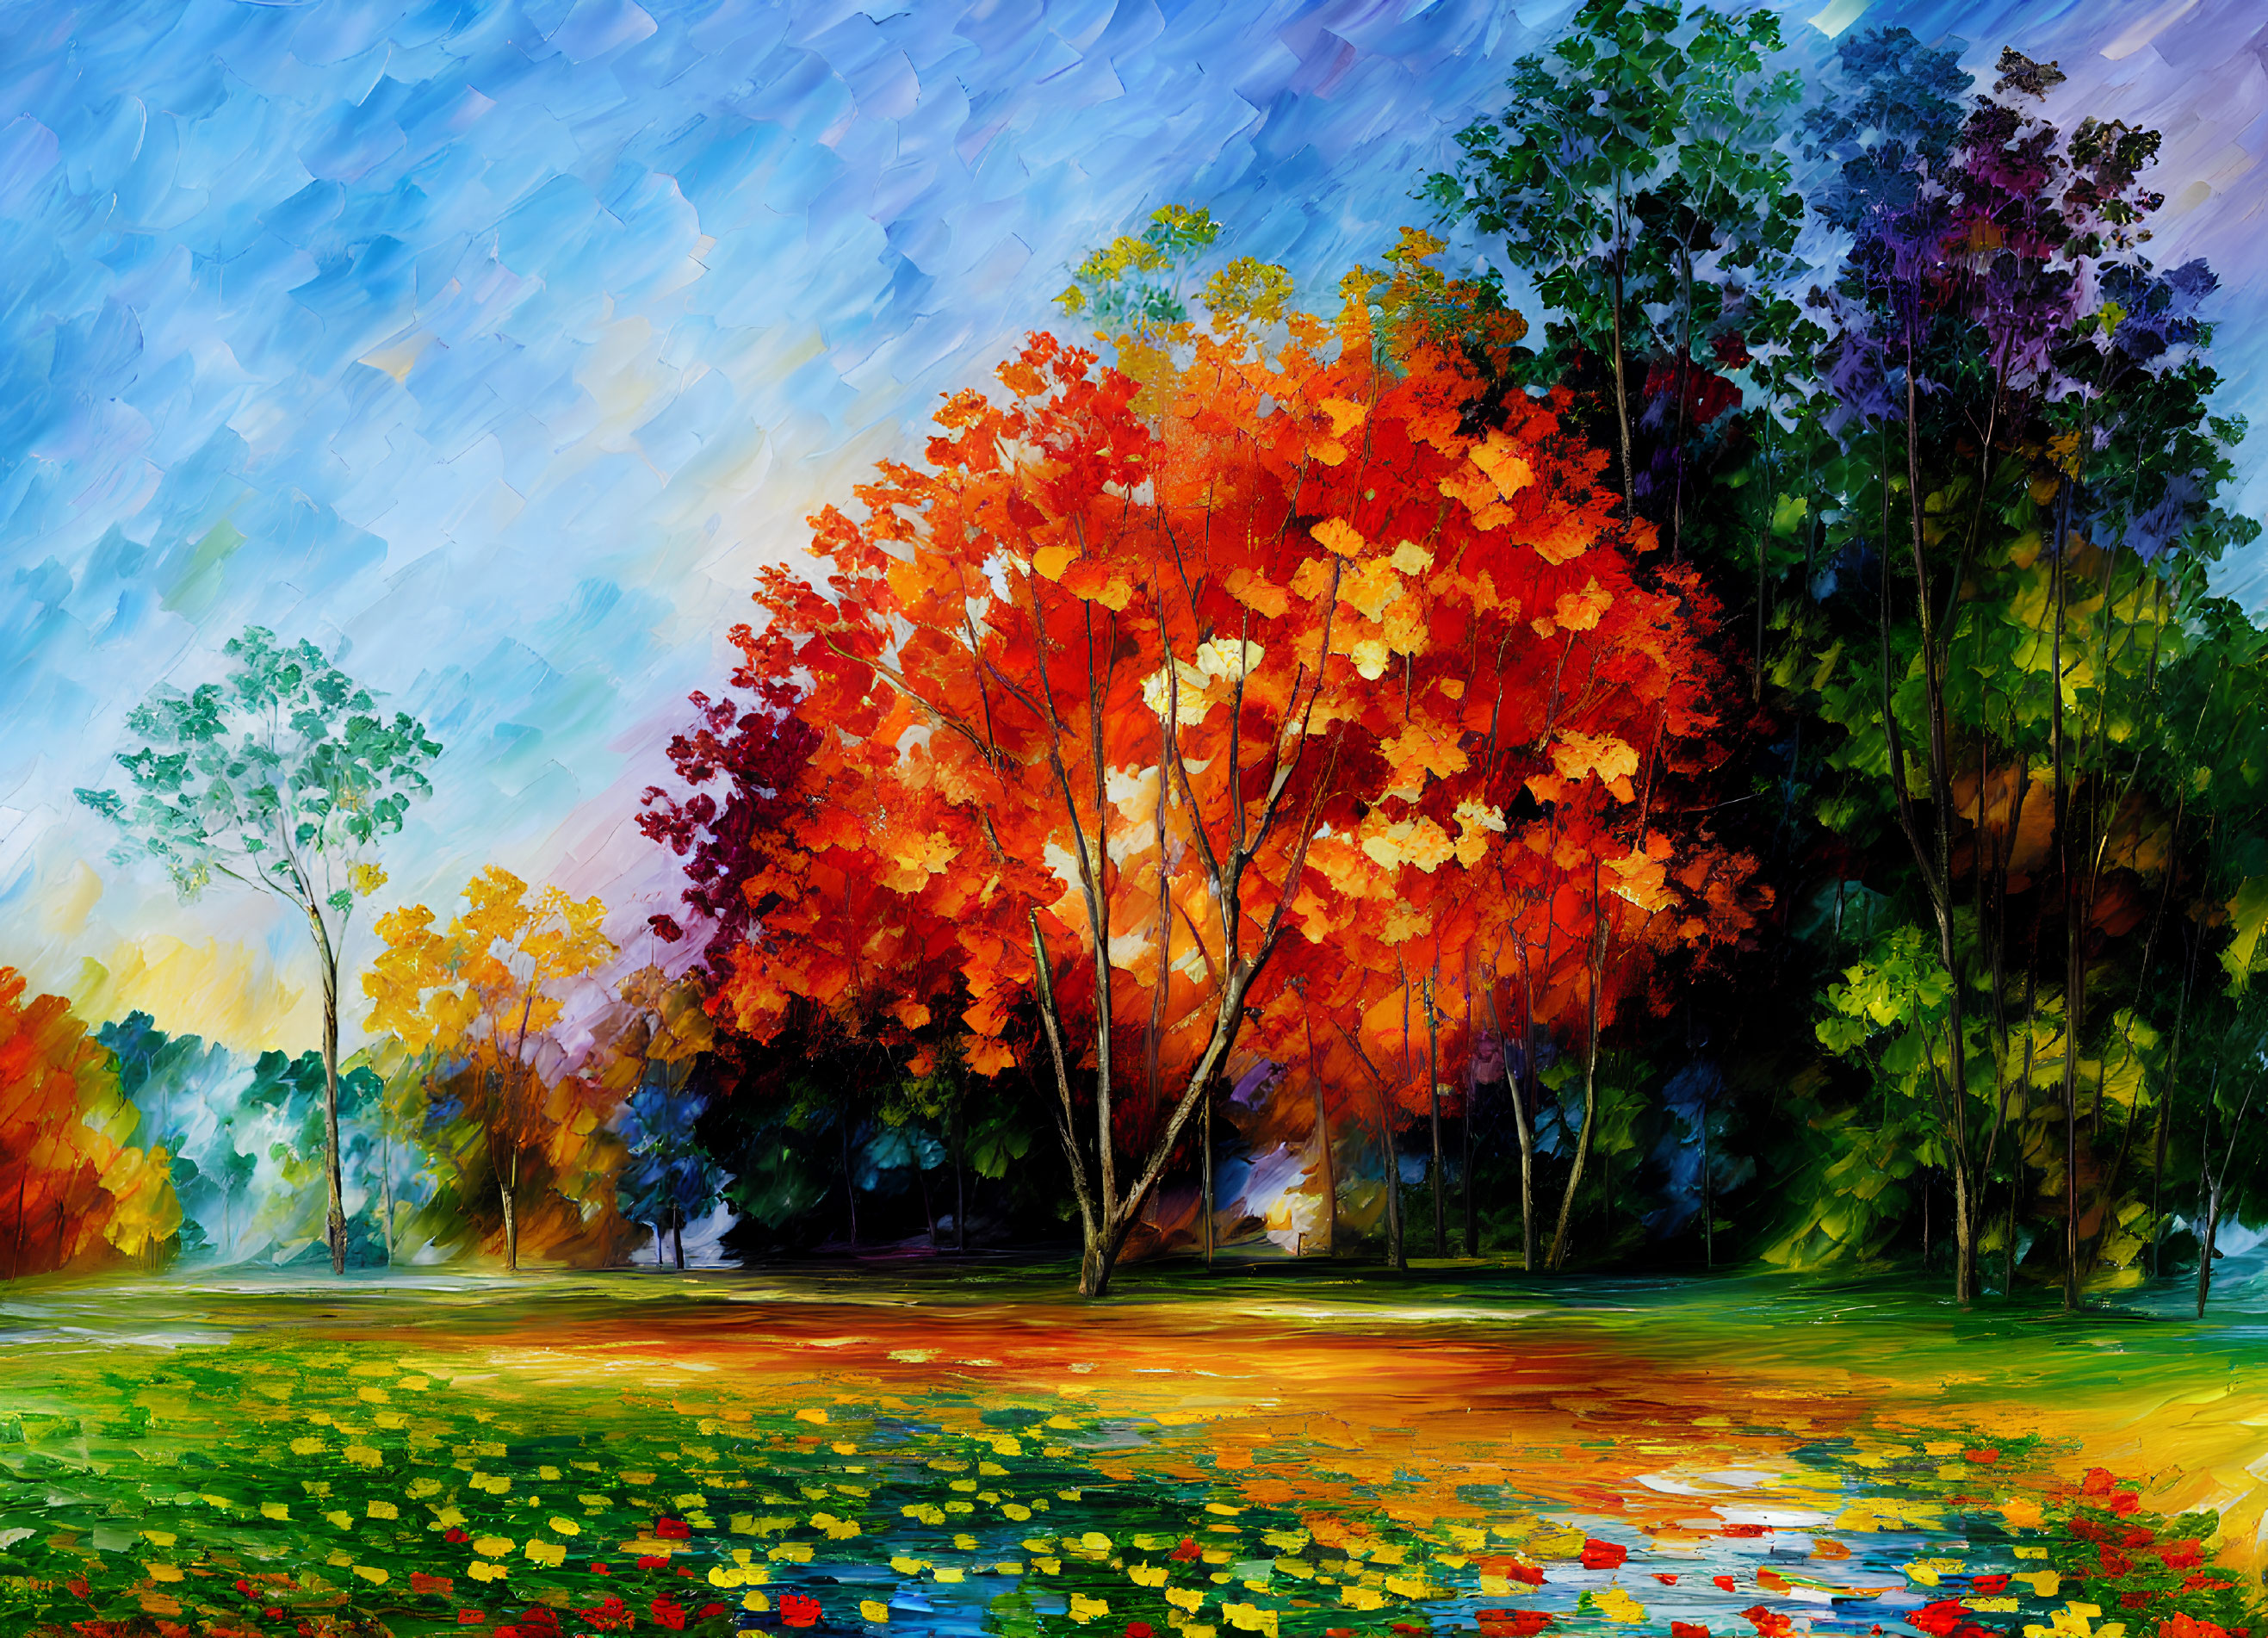 Colorful Autumnal Landscape with Red-Orange Trees and Blue Sky